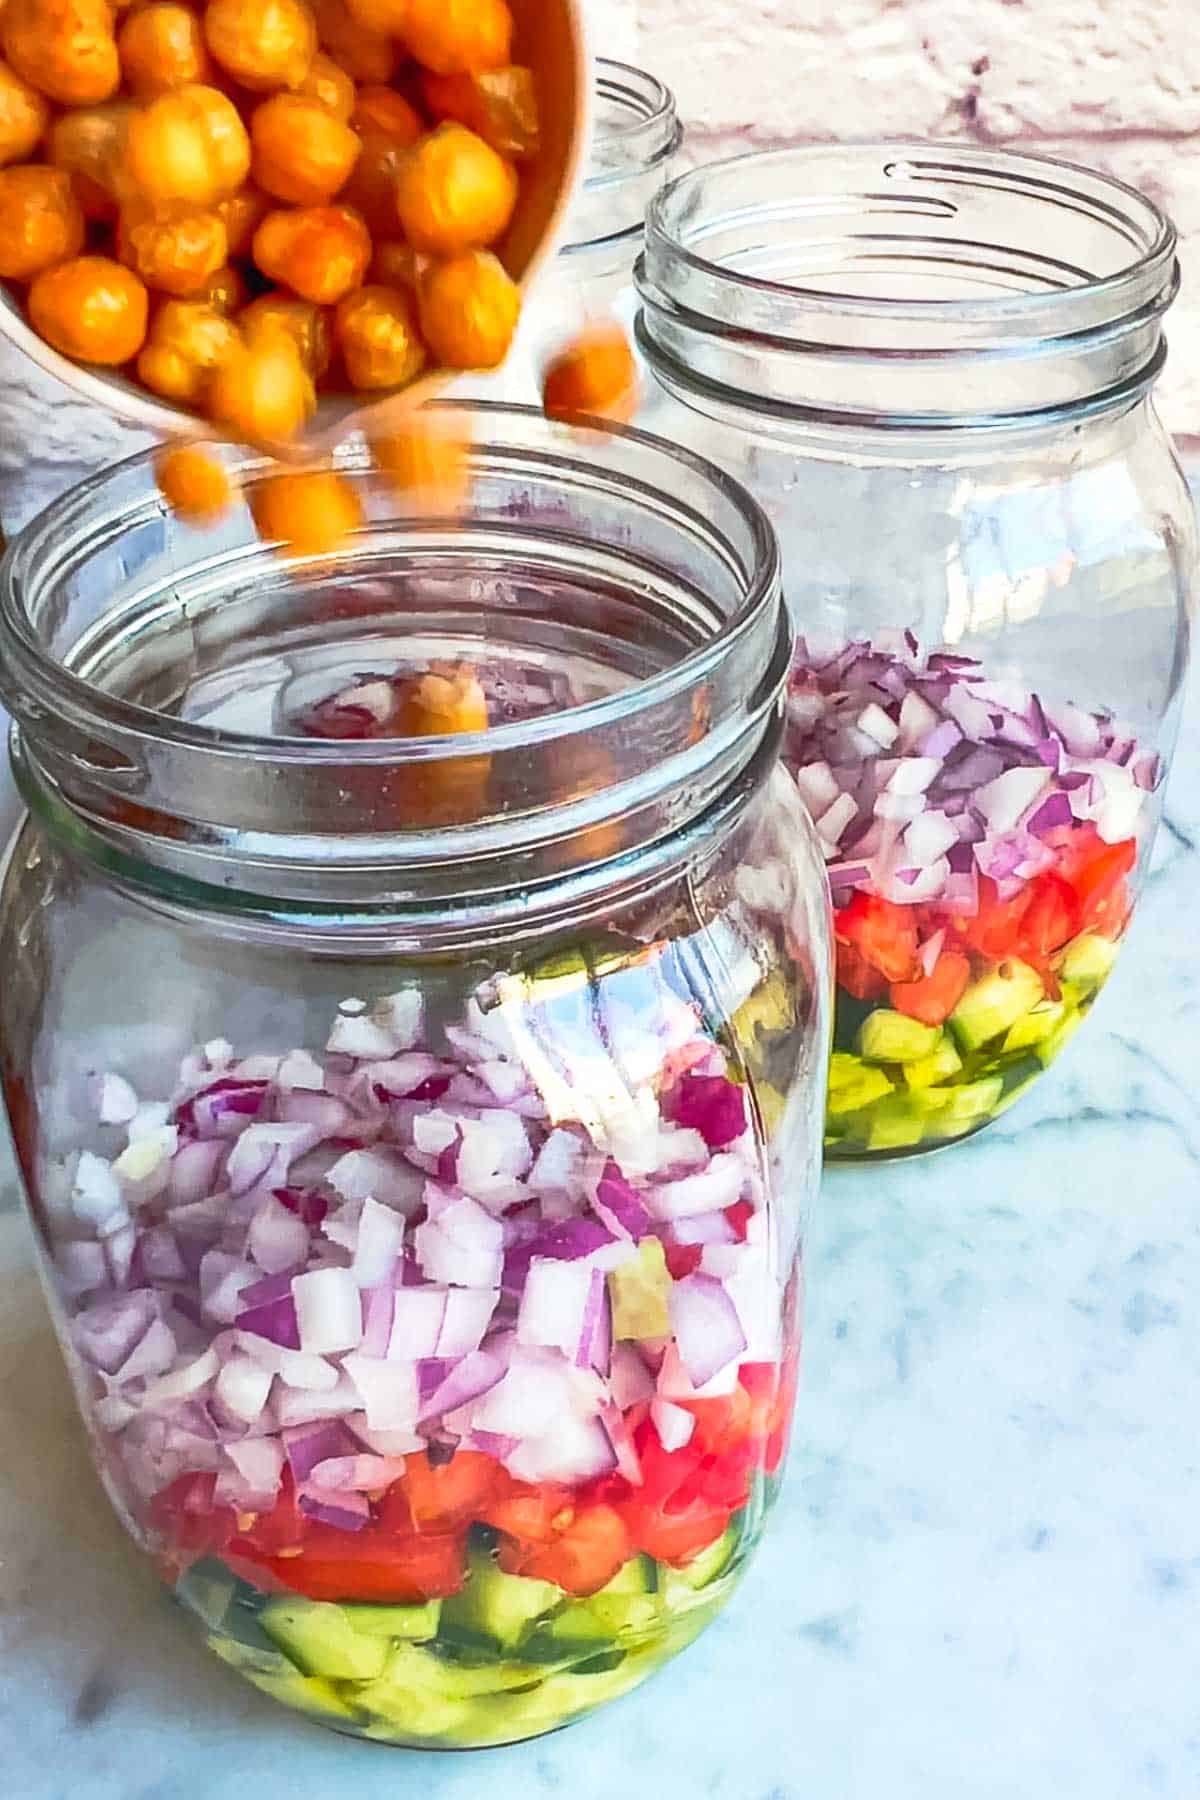 Adding roasted chickpeas to three 32-ounce salad jars with olive oil, lemon juice, chopped cucumber, tomato, and red onion.